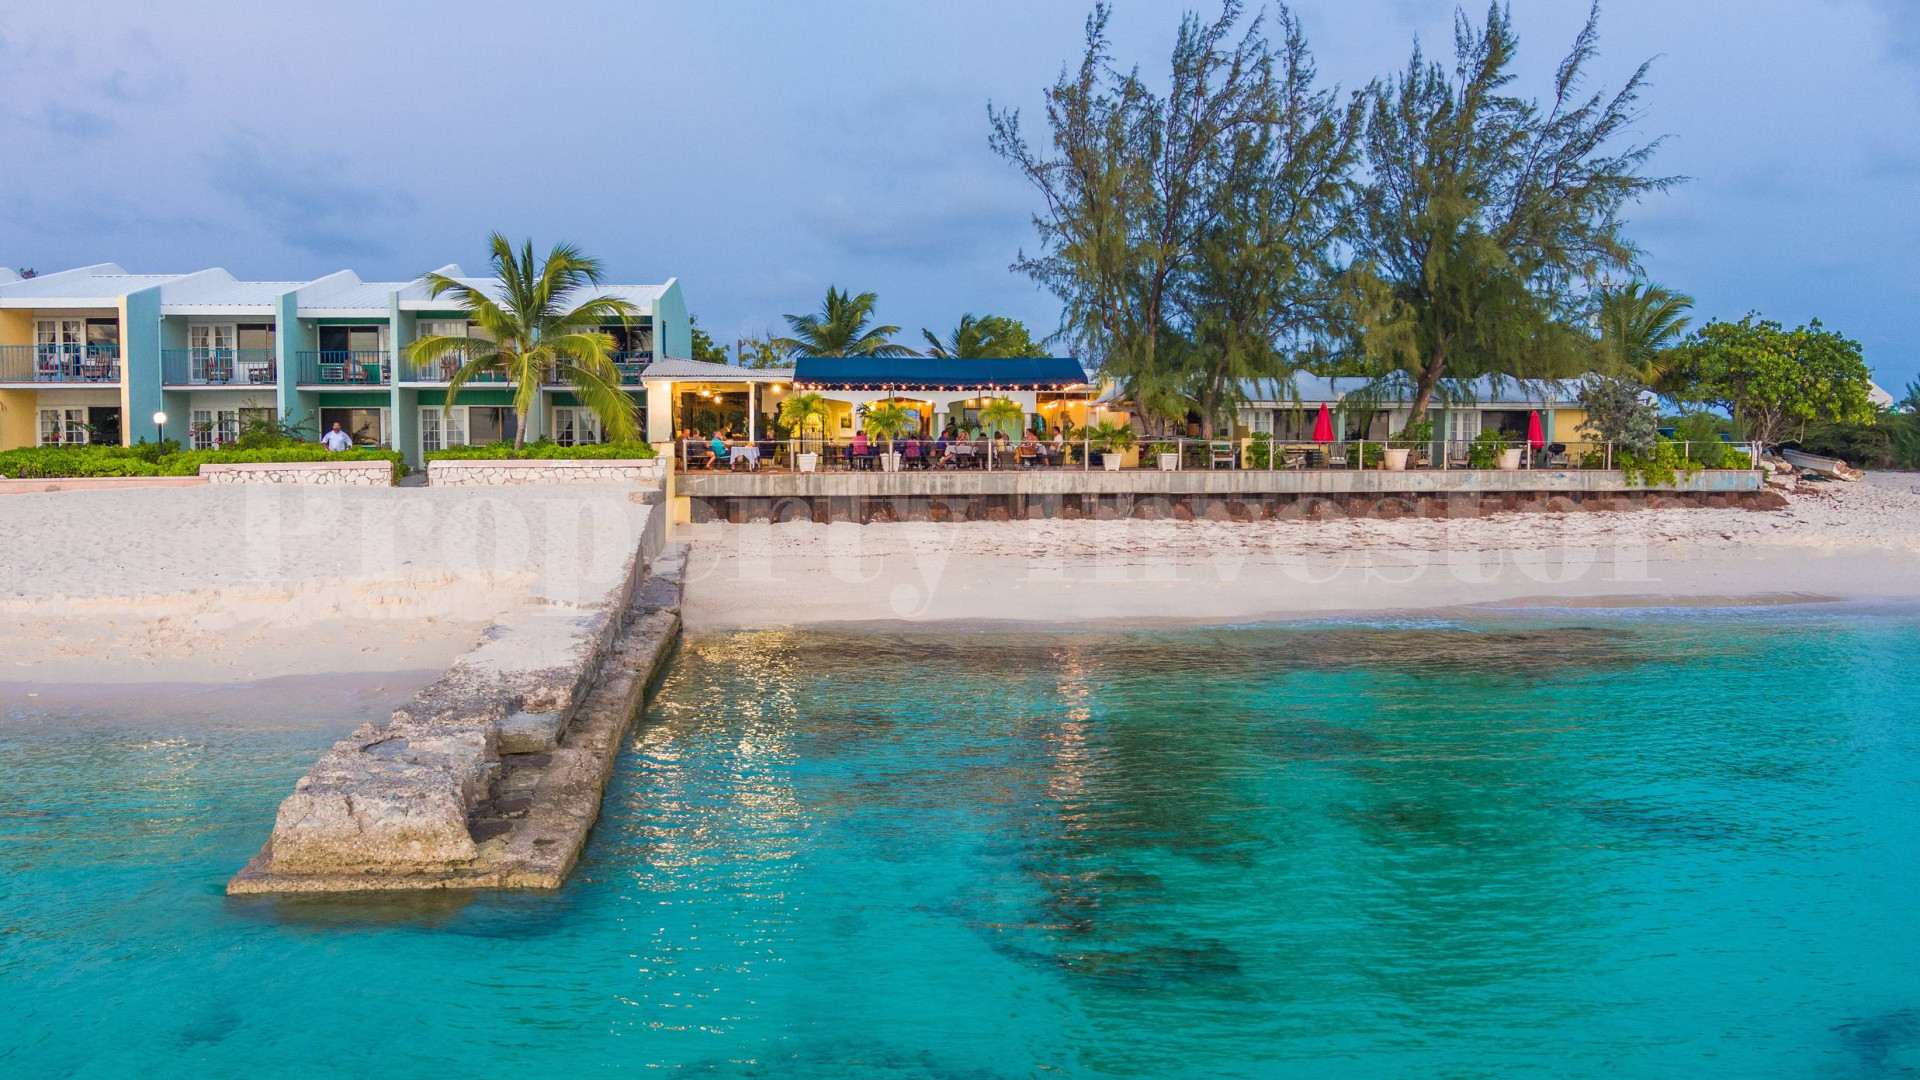 Award-Winning 40 Bedroom Boutique Beachfront Hotel for Sale in Grand Turk, Turks & Caicos